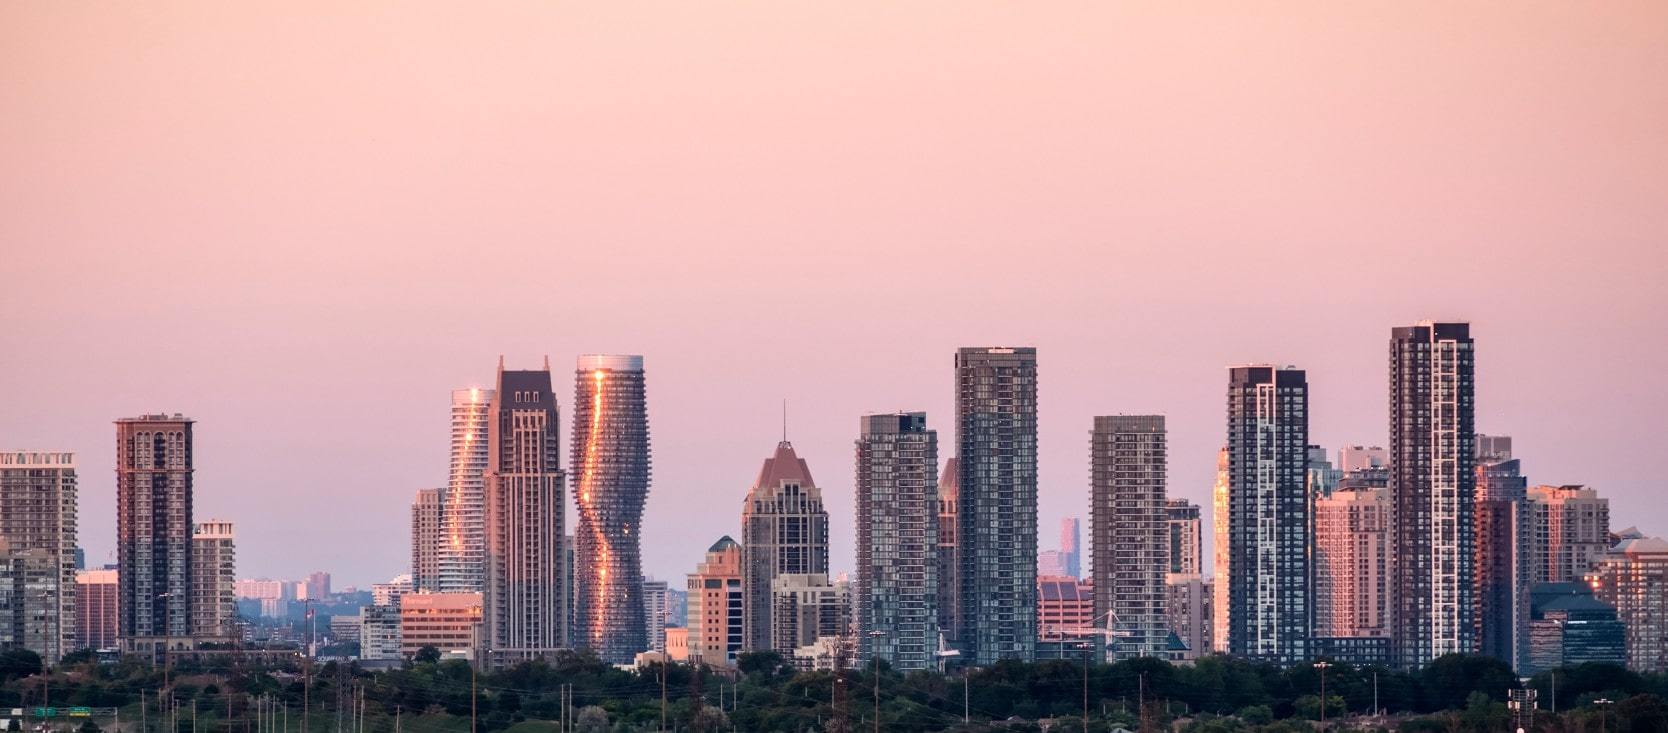 Mississauga skyline with high-rise condos and office buildings at sunset